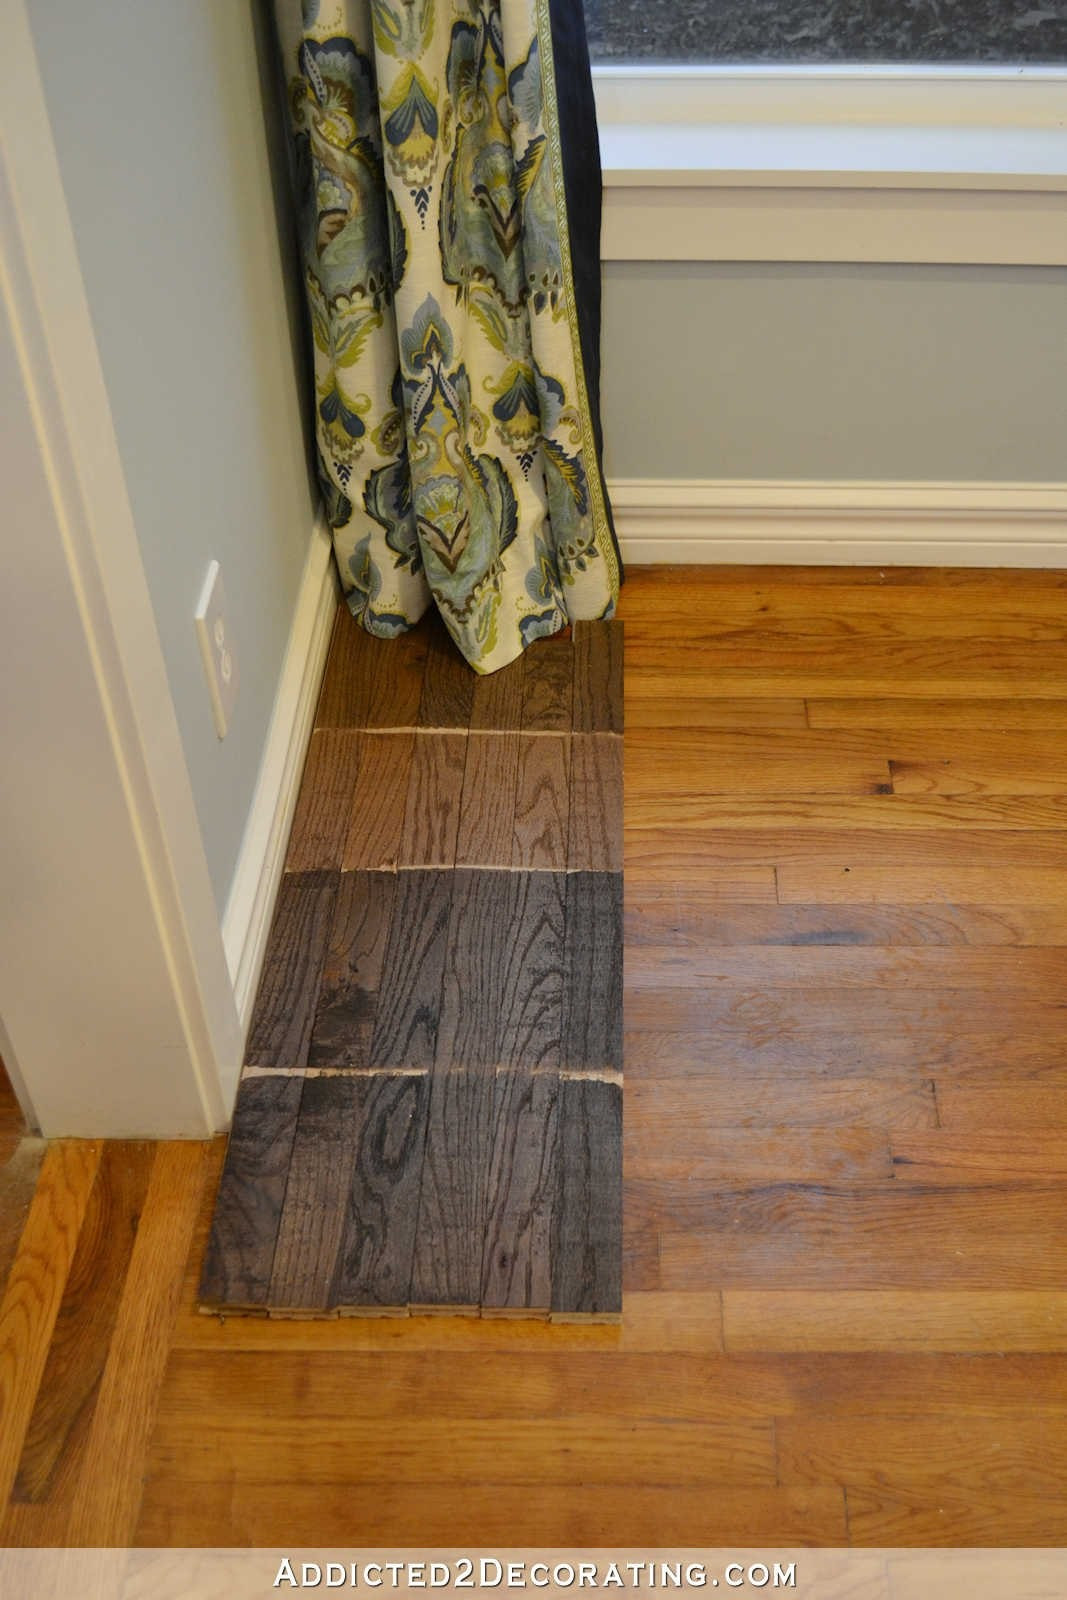 19 attractive Laminate or Engineered Hardwood Flooring which is Better 2024 free download laminate or engineered hardwood flooring which is better of bruce hardwood floor cleaner vs bona engineered cost laminate for how do you clean engineered hardwood floors unique floor bruce f